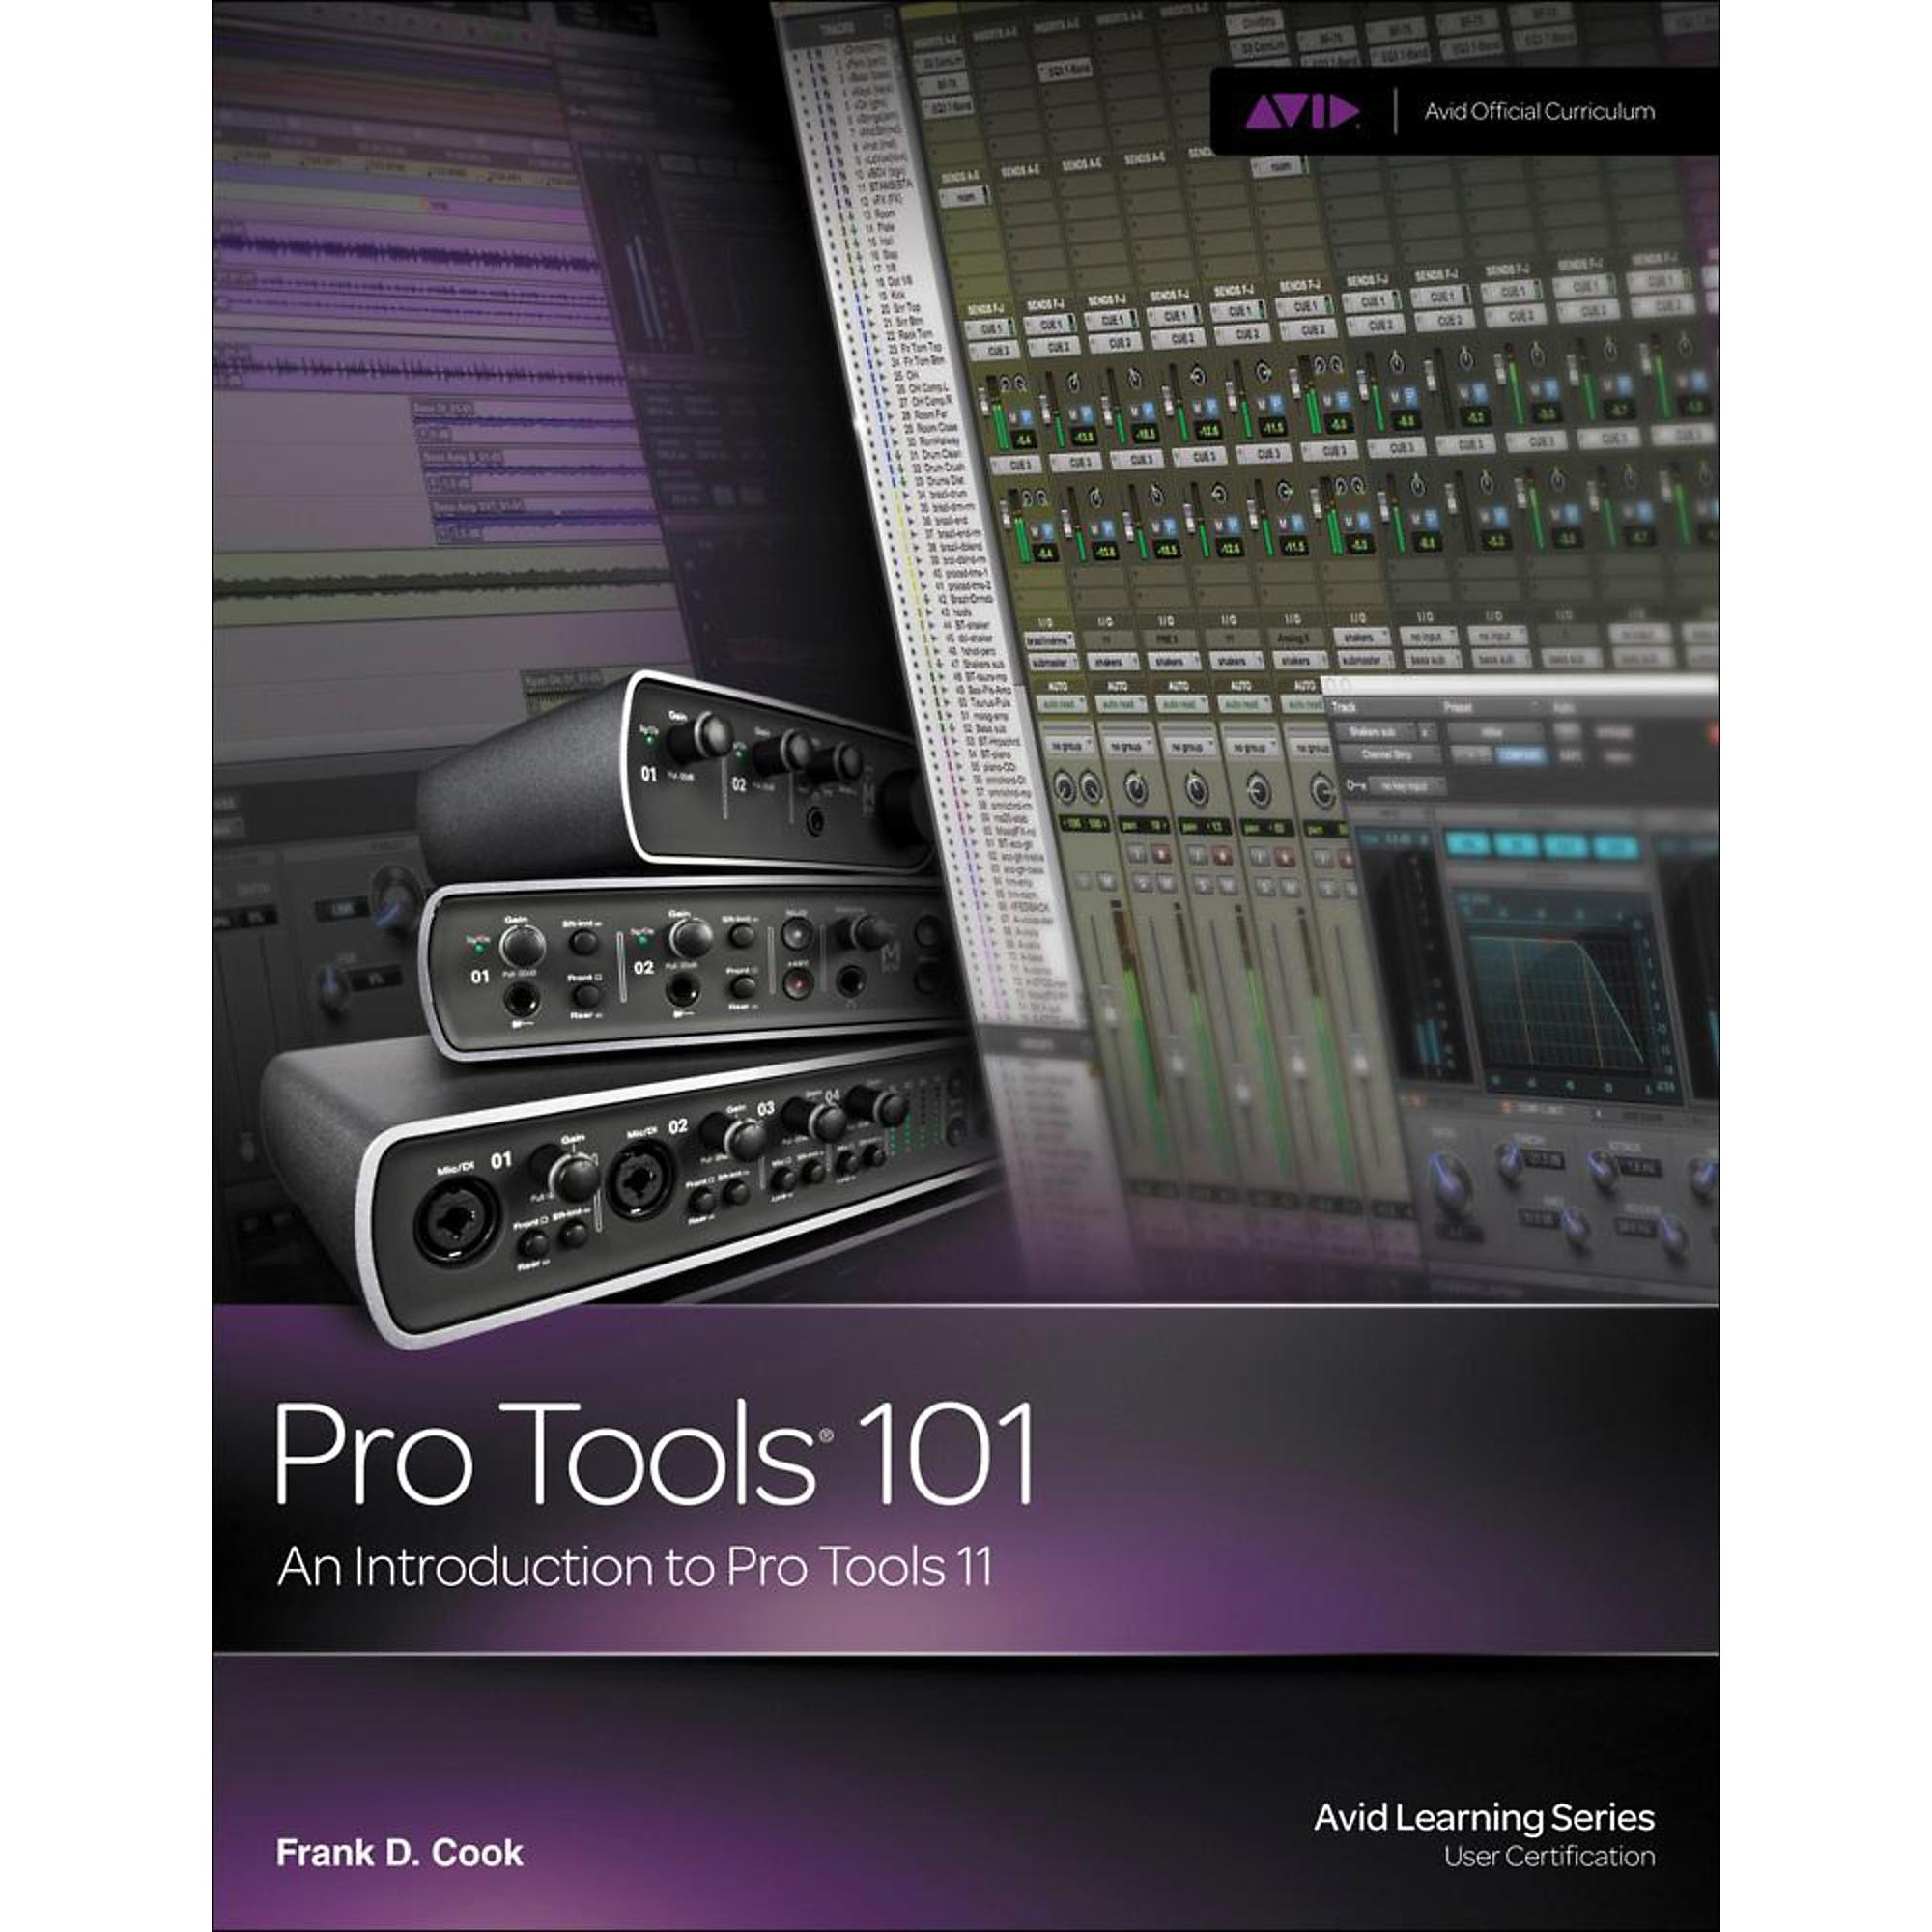 pro tools 101 courseware download